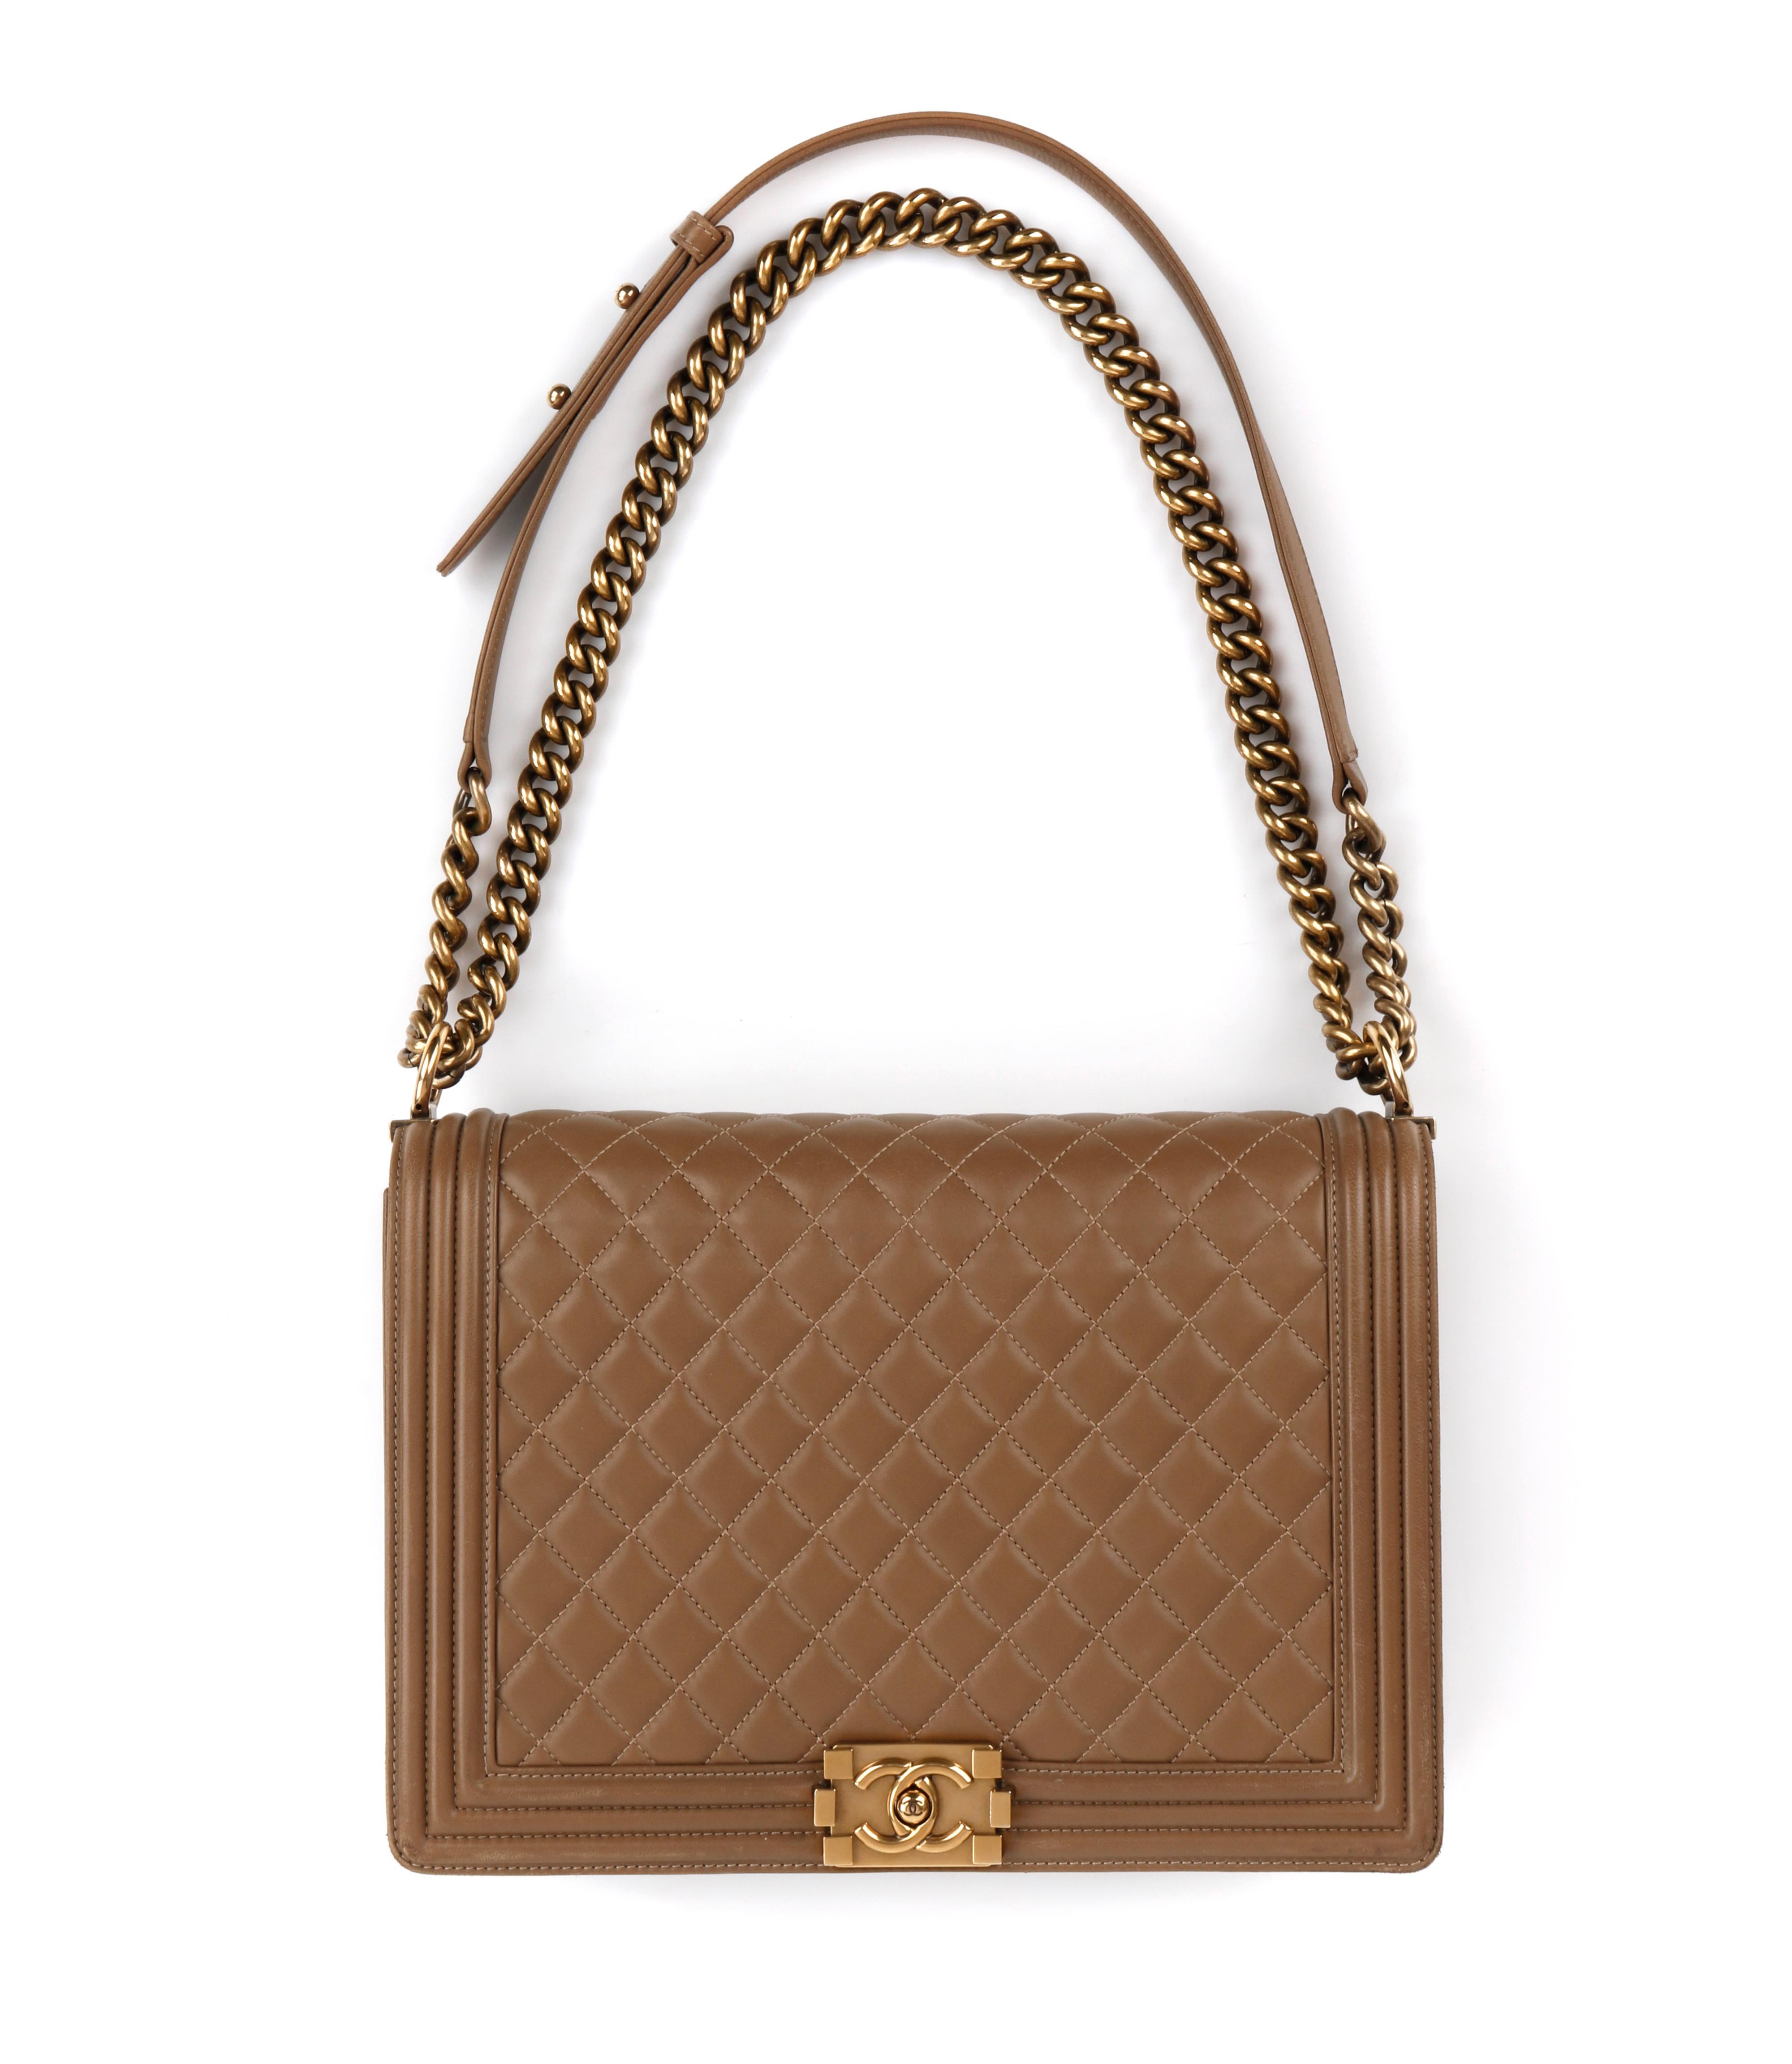 CHANEL c.2014 “Boy” Tan Quilted Leather Gold Hardware Cross-body Shoulder Bag
 
Estimated Retail: $5,500
 
Brand / Manufacturer: Chanel
Collection: Boy Chanel 
Style: Crossbody / Shoulder Bag 
Color(s): Tan and gold. 
Unmarked Materials (feel of):